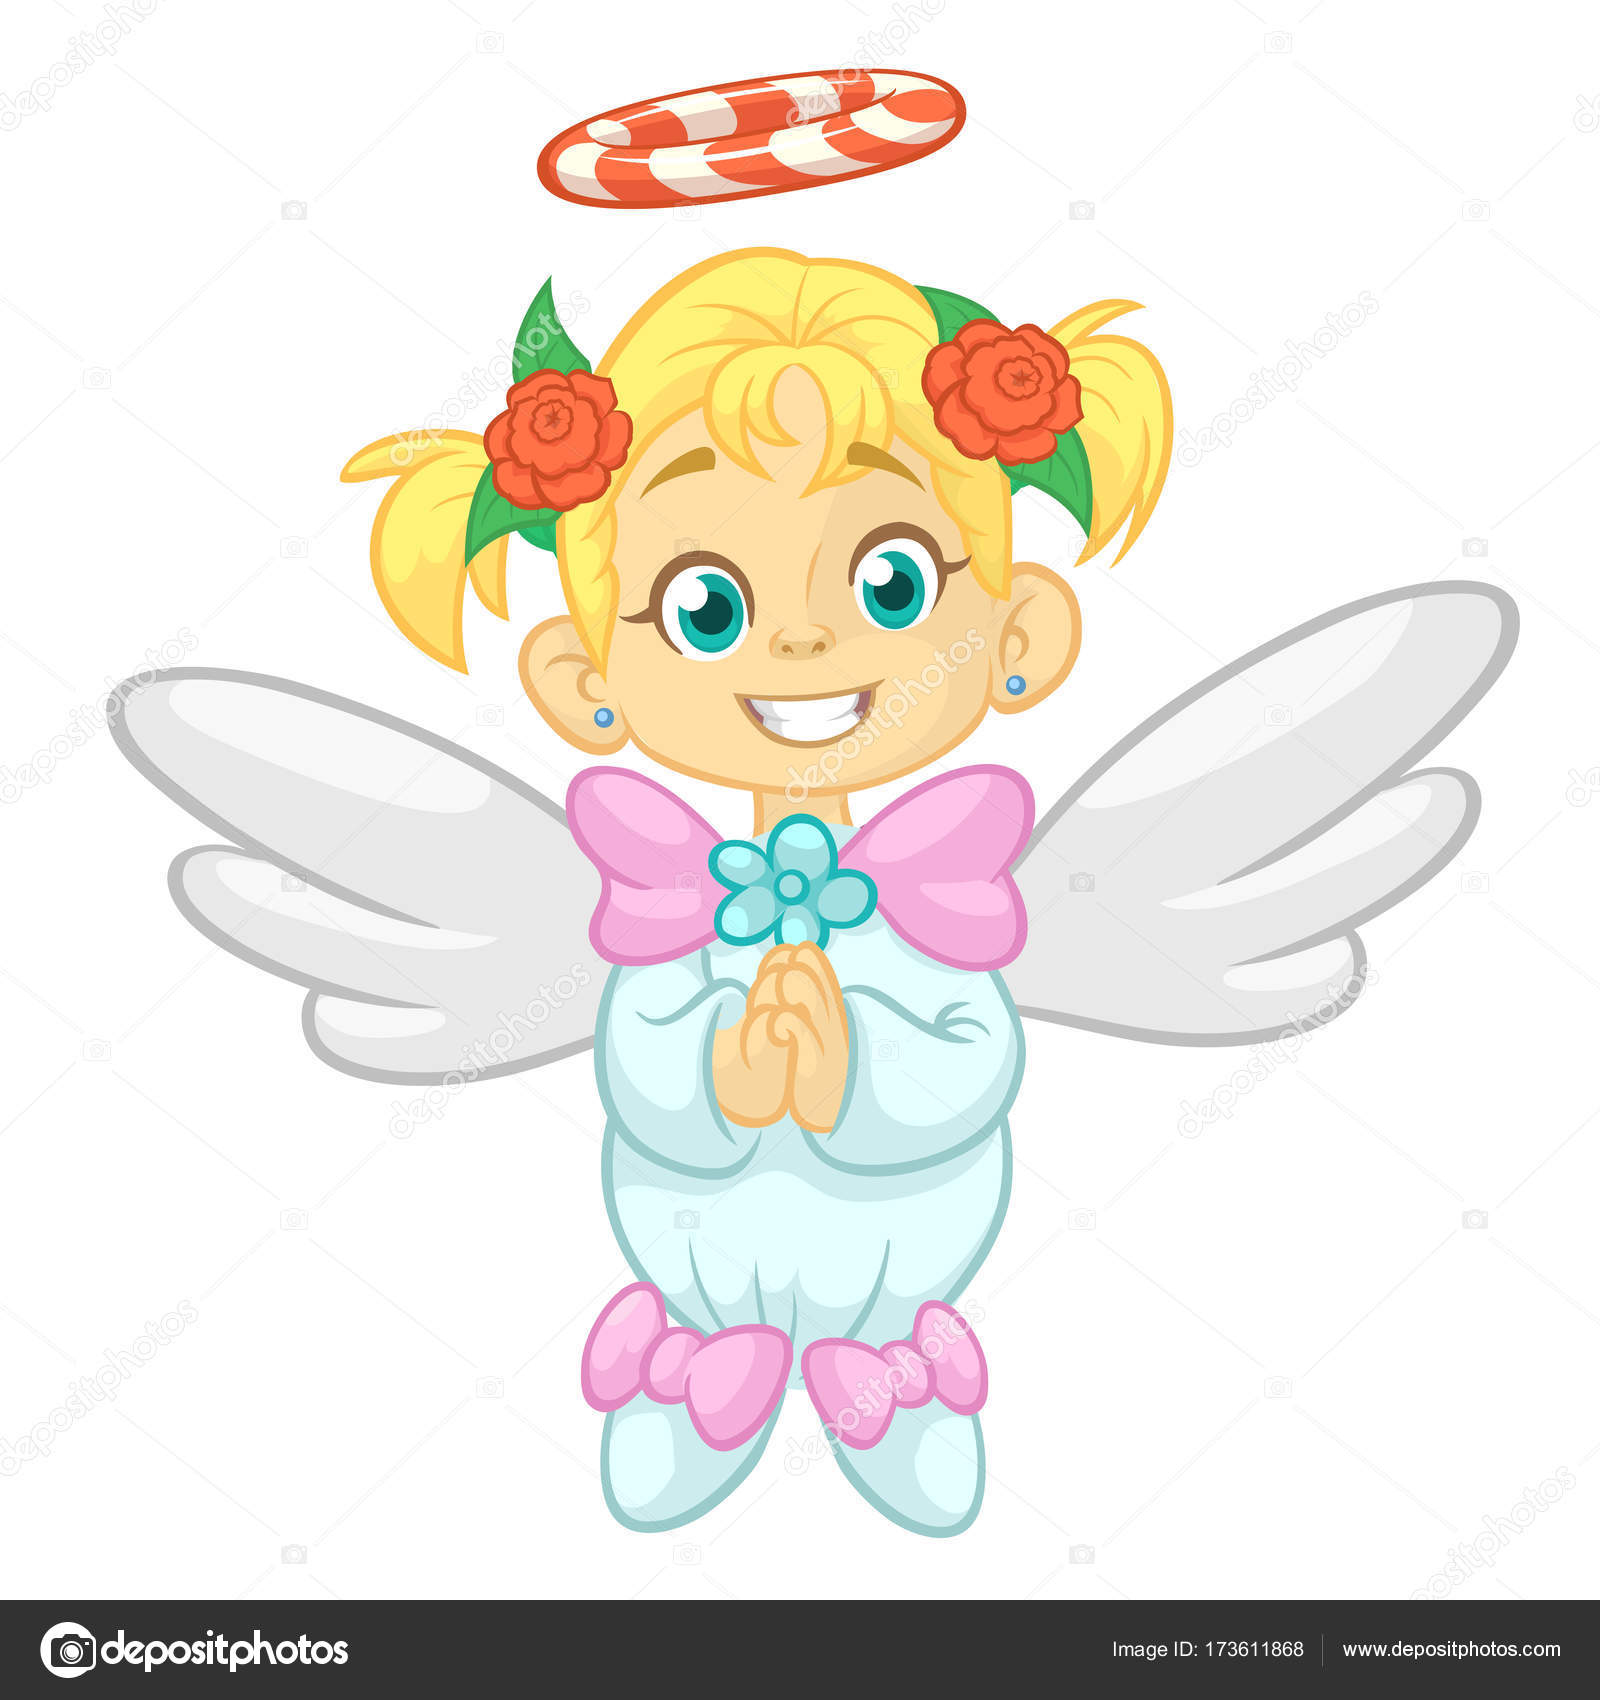 Cute happy Christmas angel character. Vector illustration isolated ...